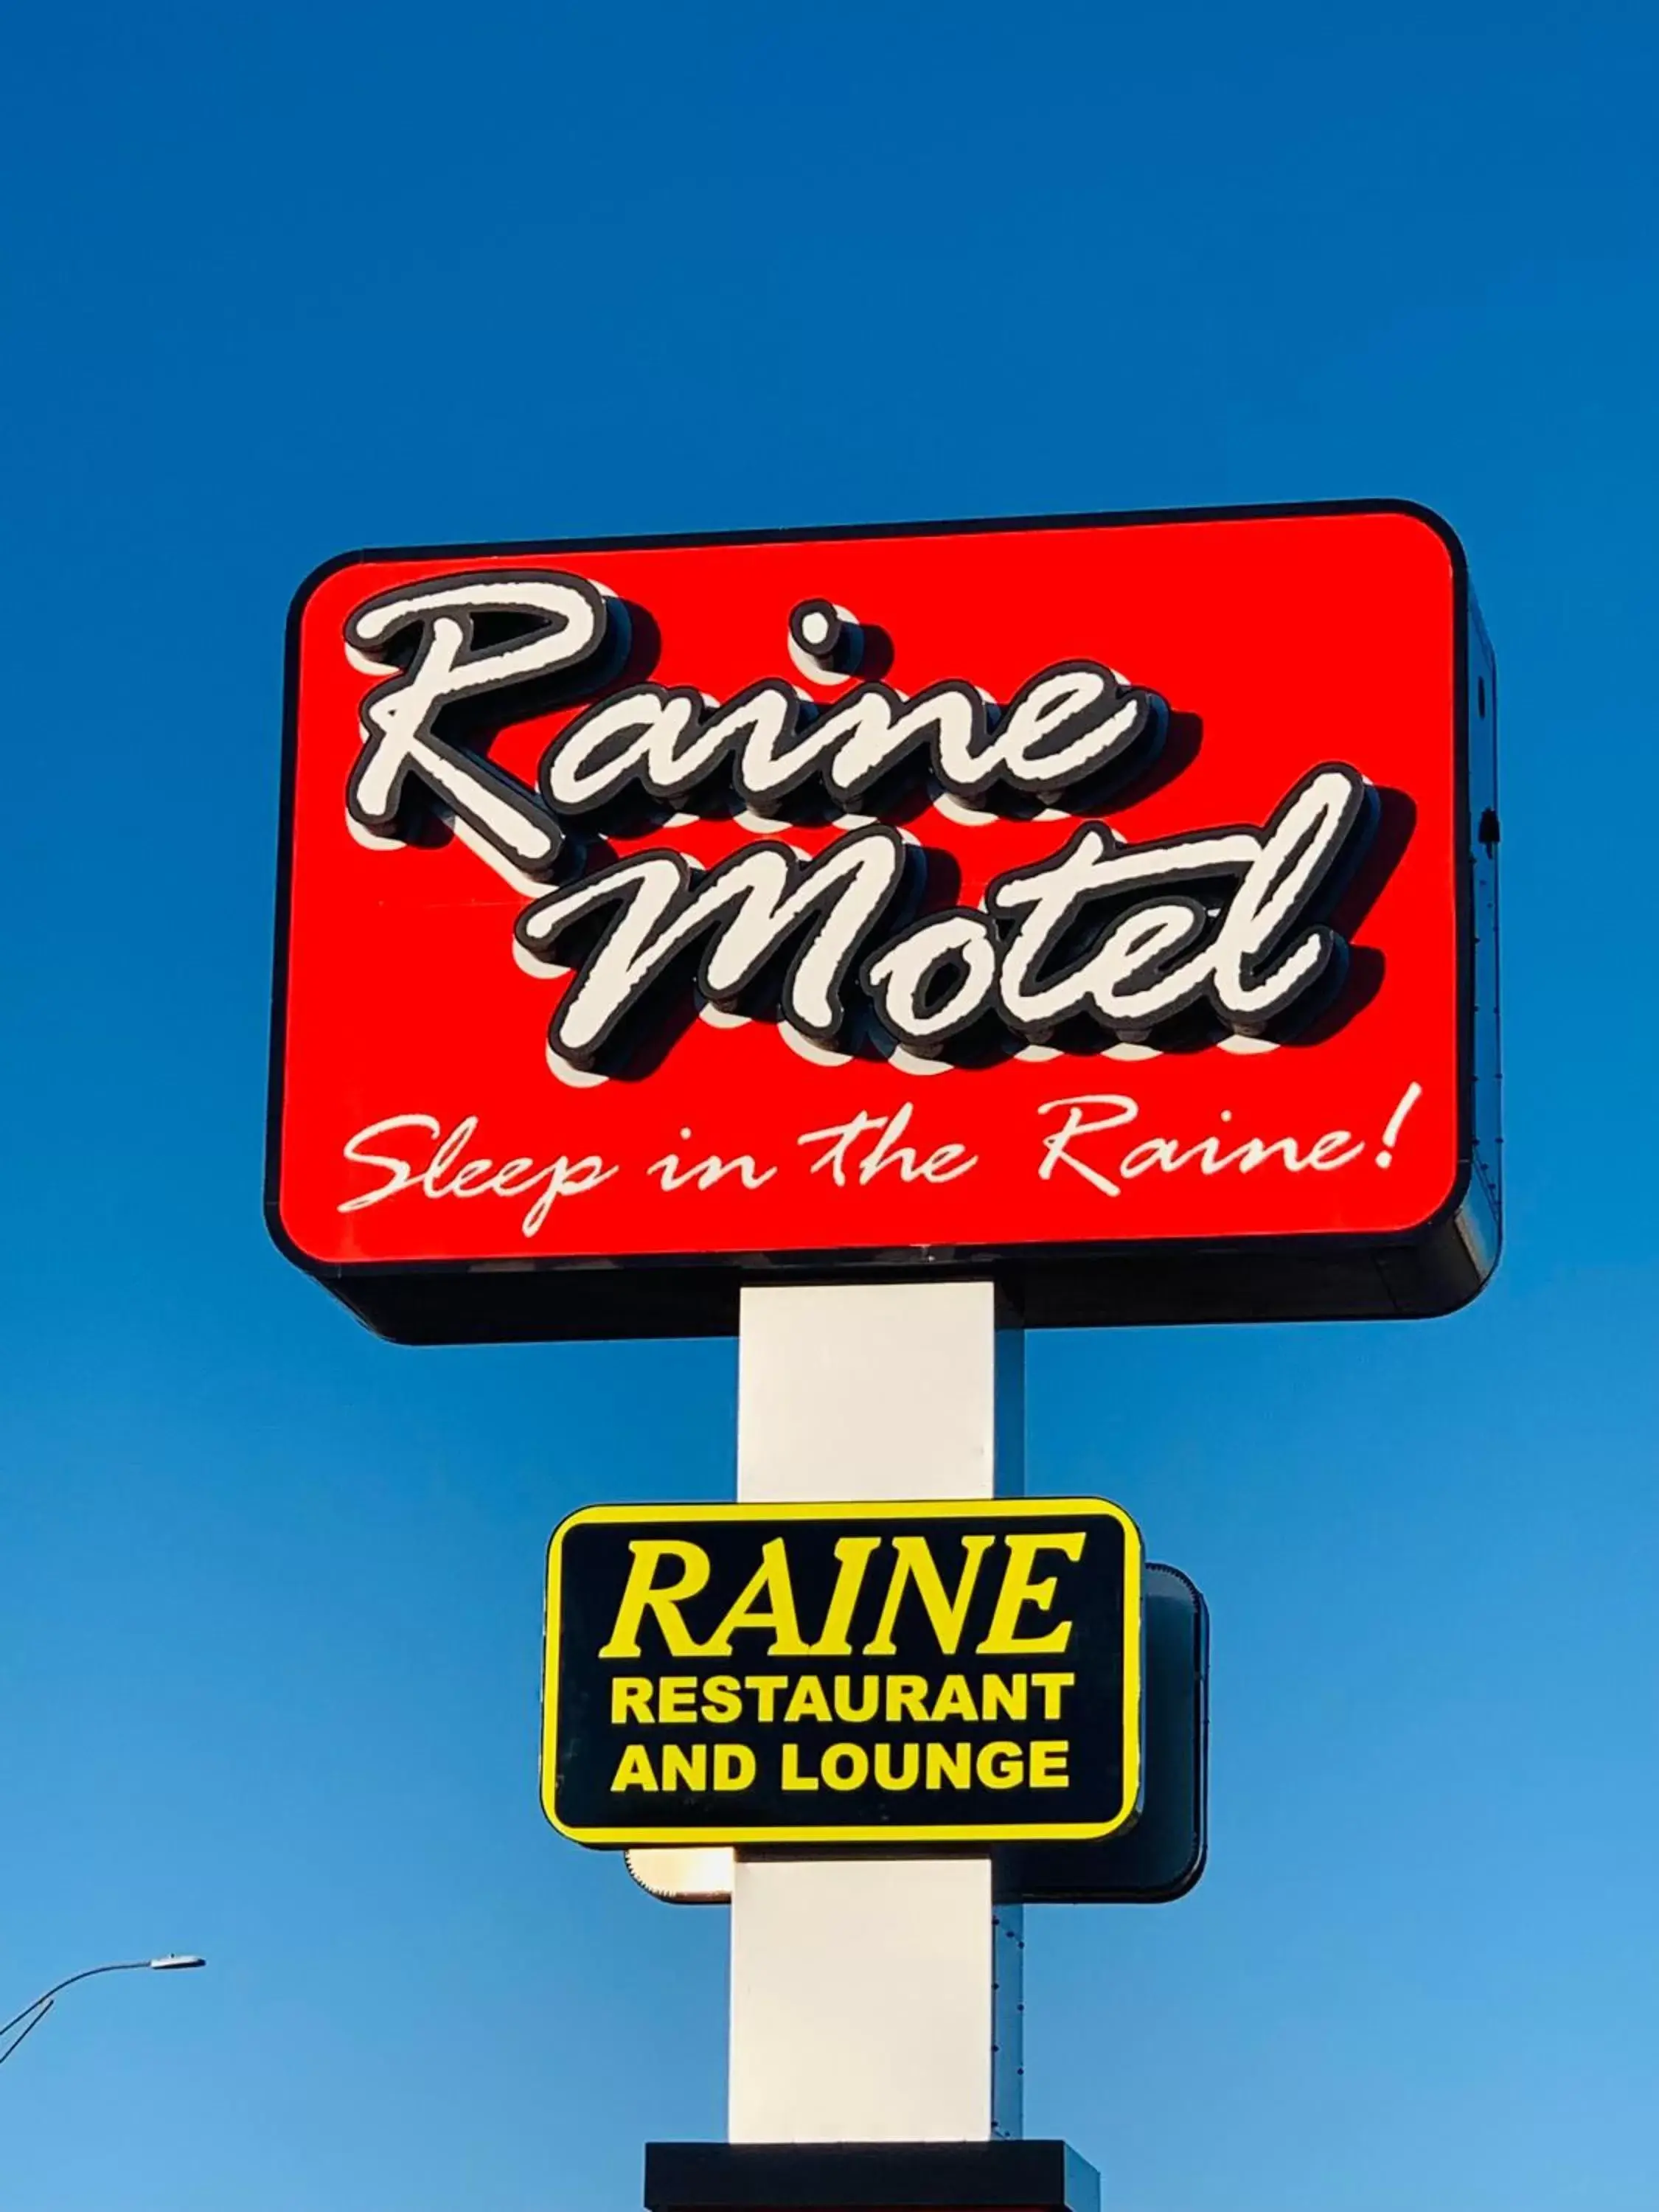 Property logo or sign in Raine Motel